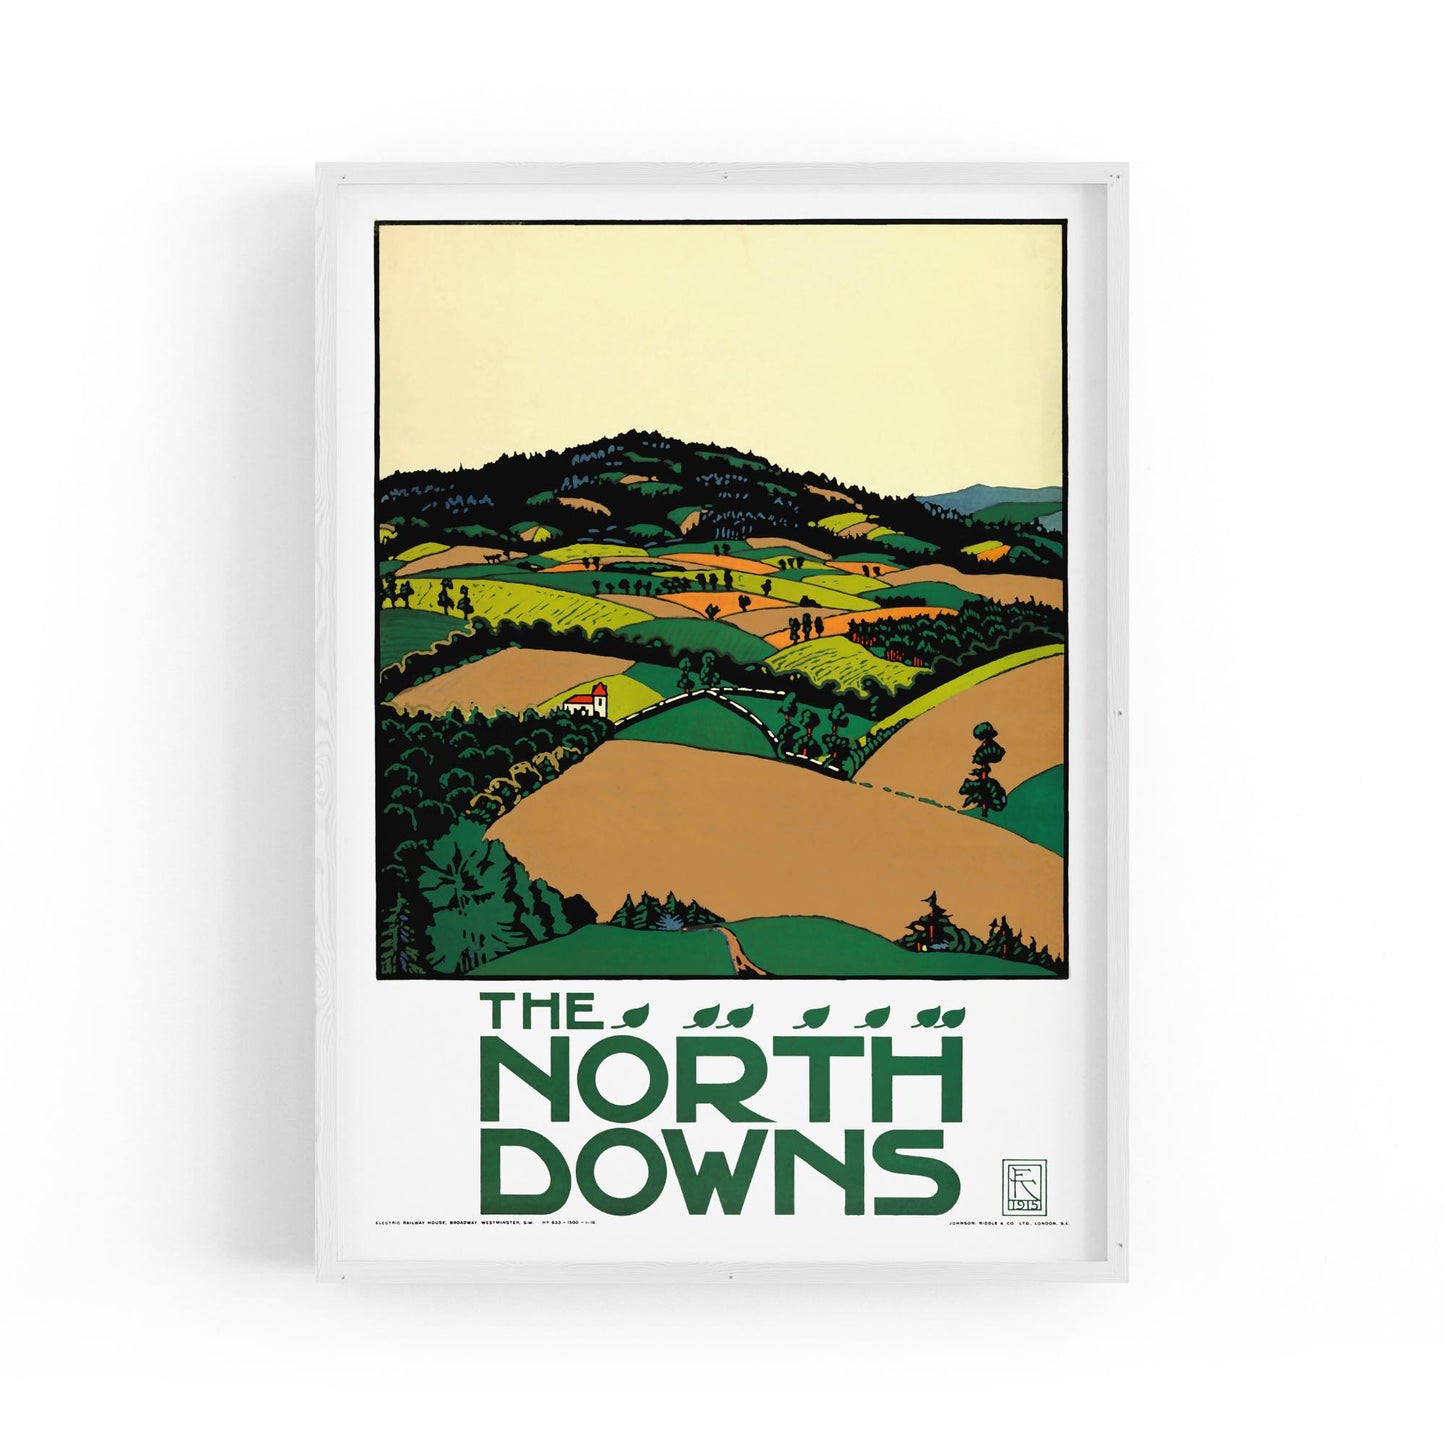 The North Downs Countryside, Britain | Framed Vintage Travel Poster